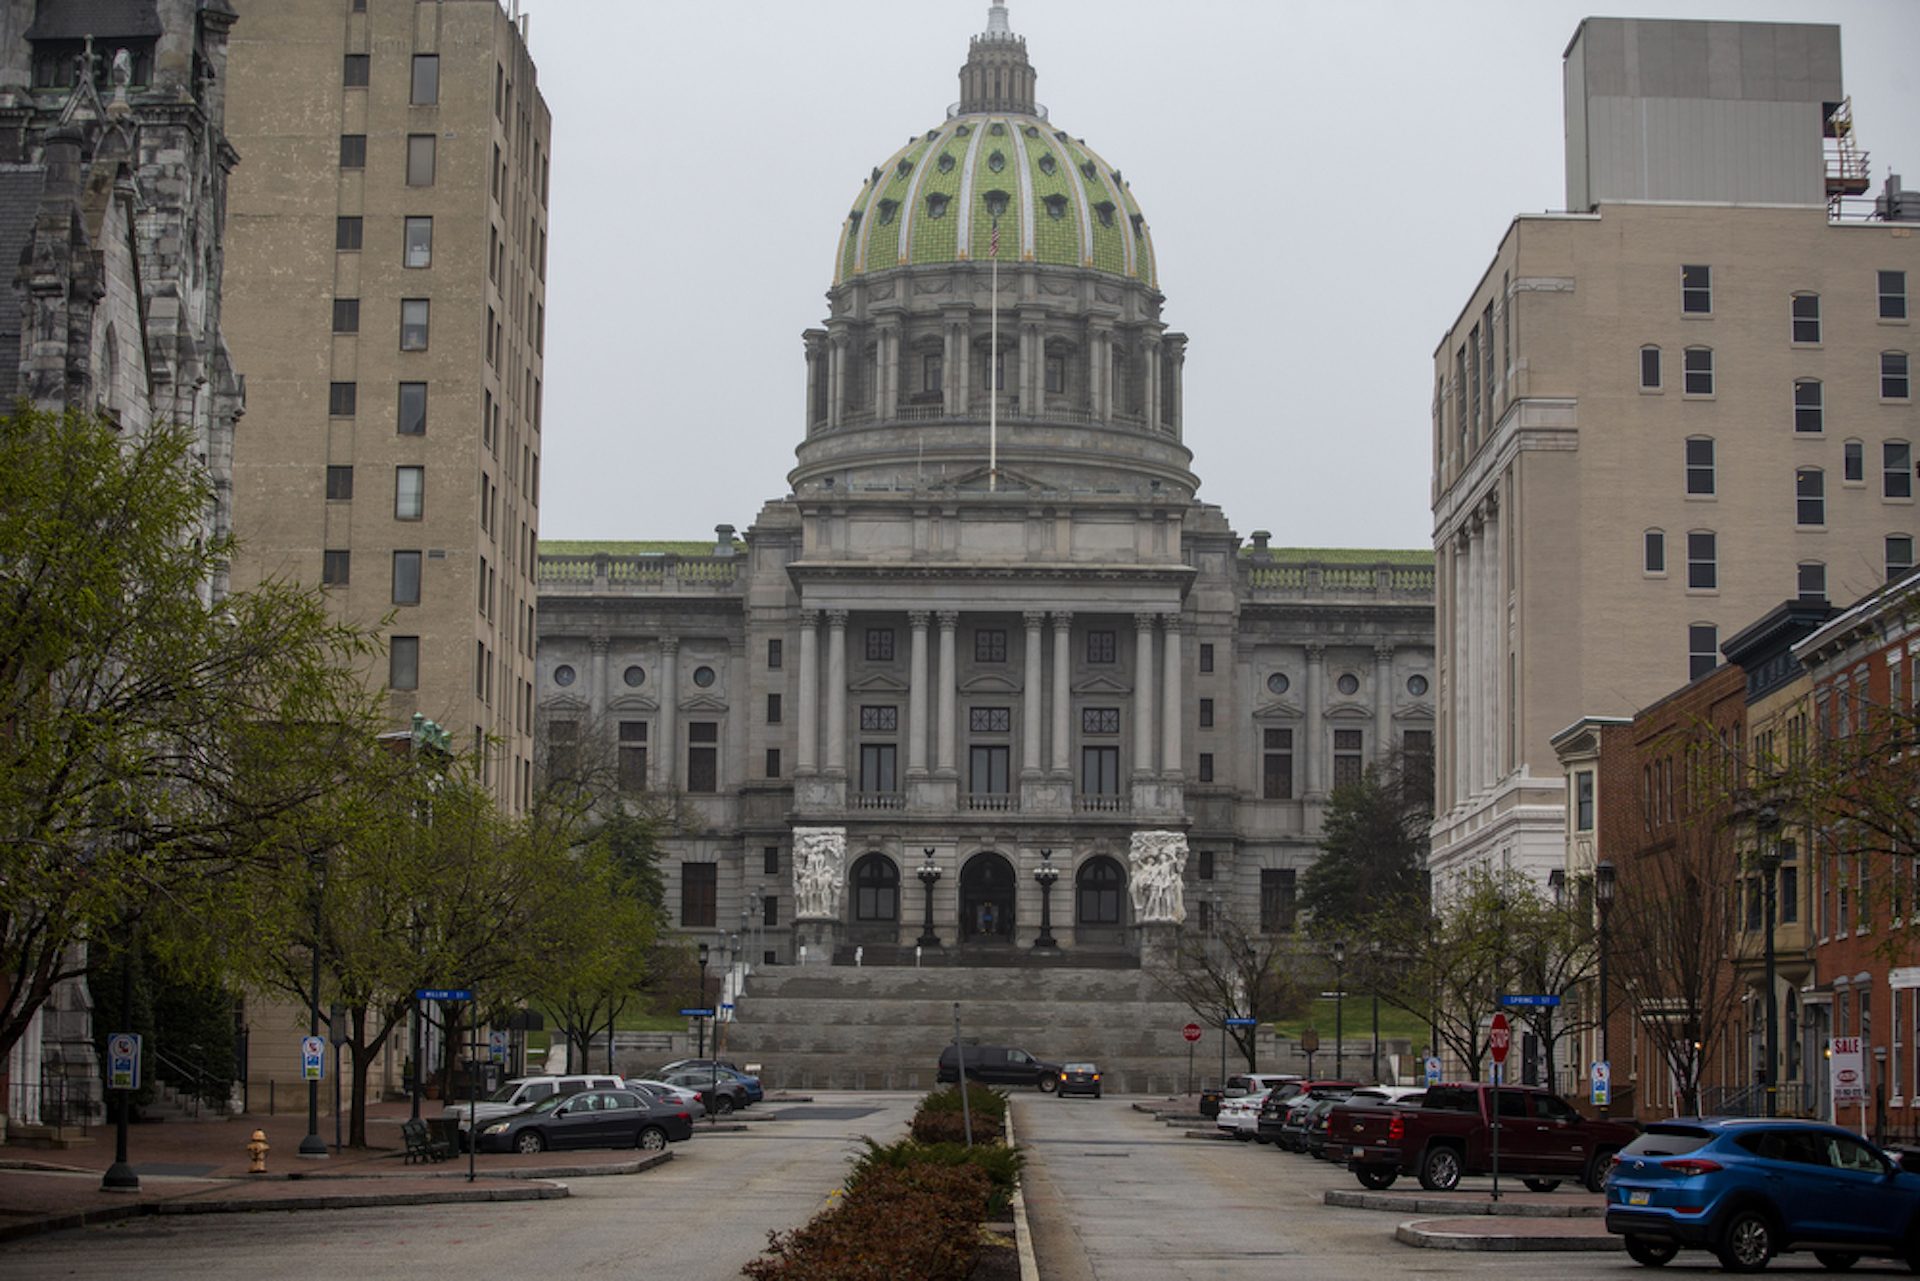 Downtown Harrisburg, looking at the State Capitol on State St., is mostly deserted during the coronavirus pandemic, Sunday, March 29, 2020.